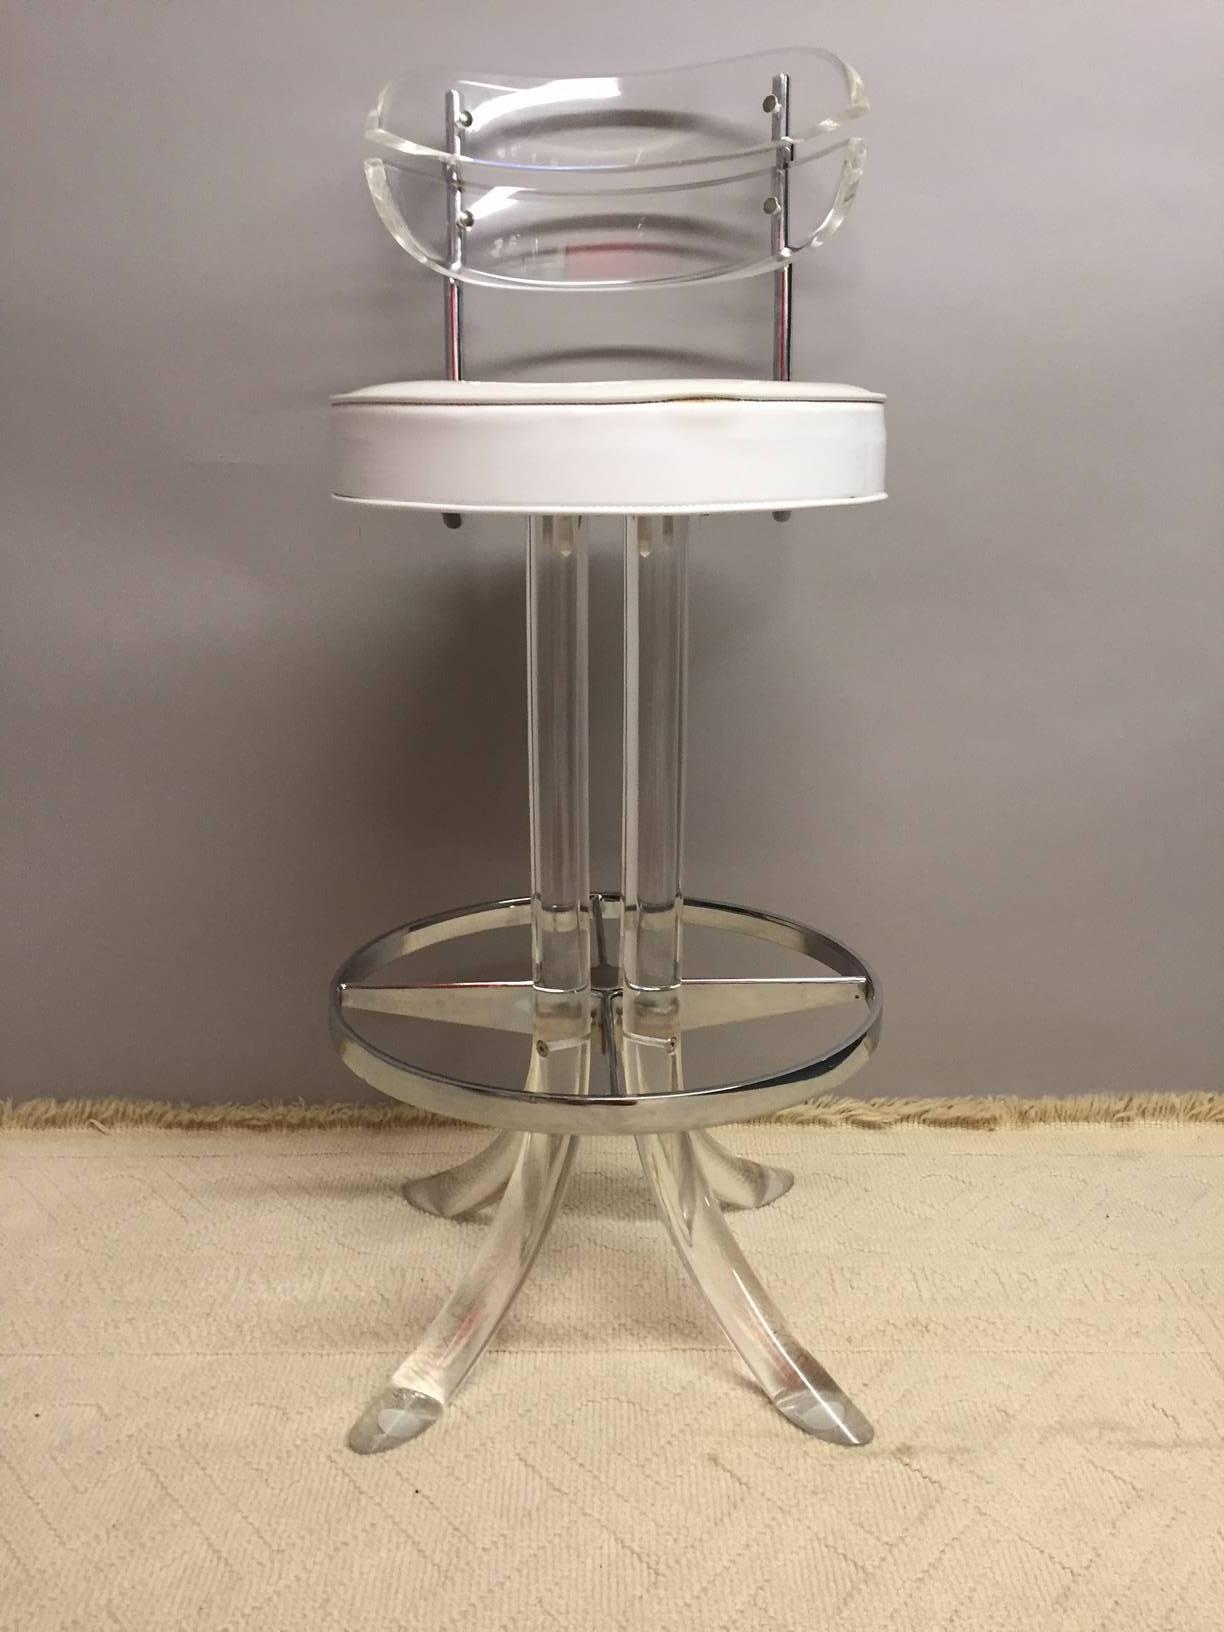 Two cool Lucite and chrome barstools with original white vinyl upholstery, by Hills Manufacturing Co.